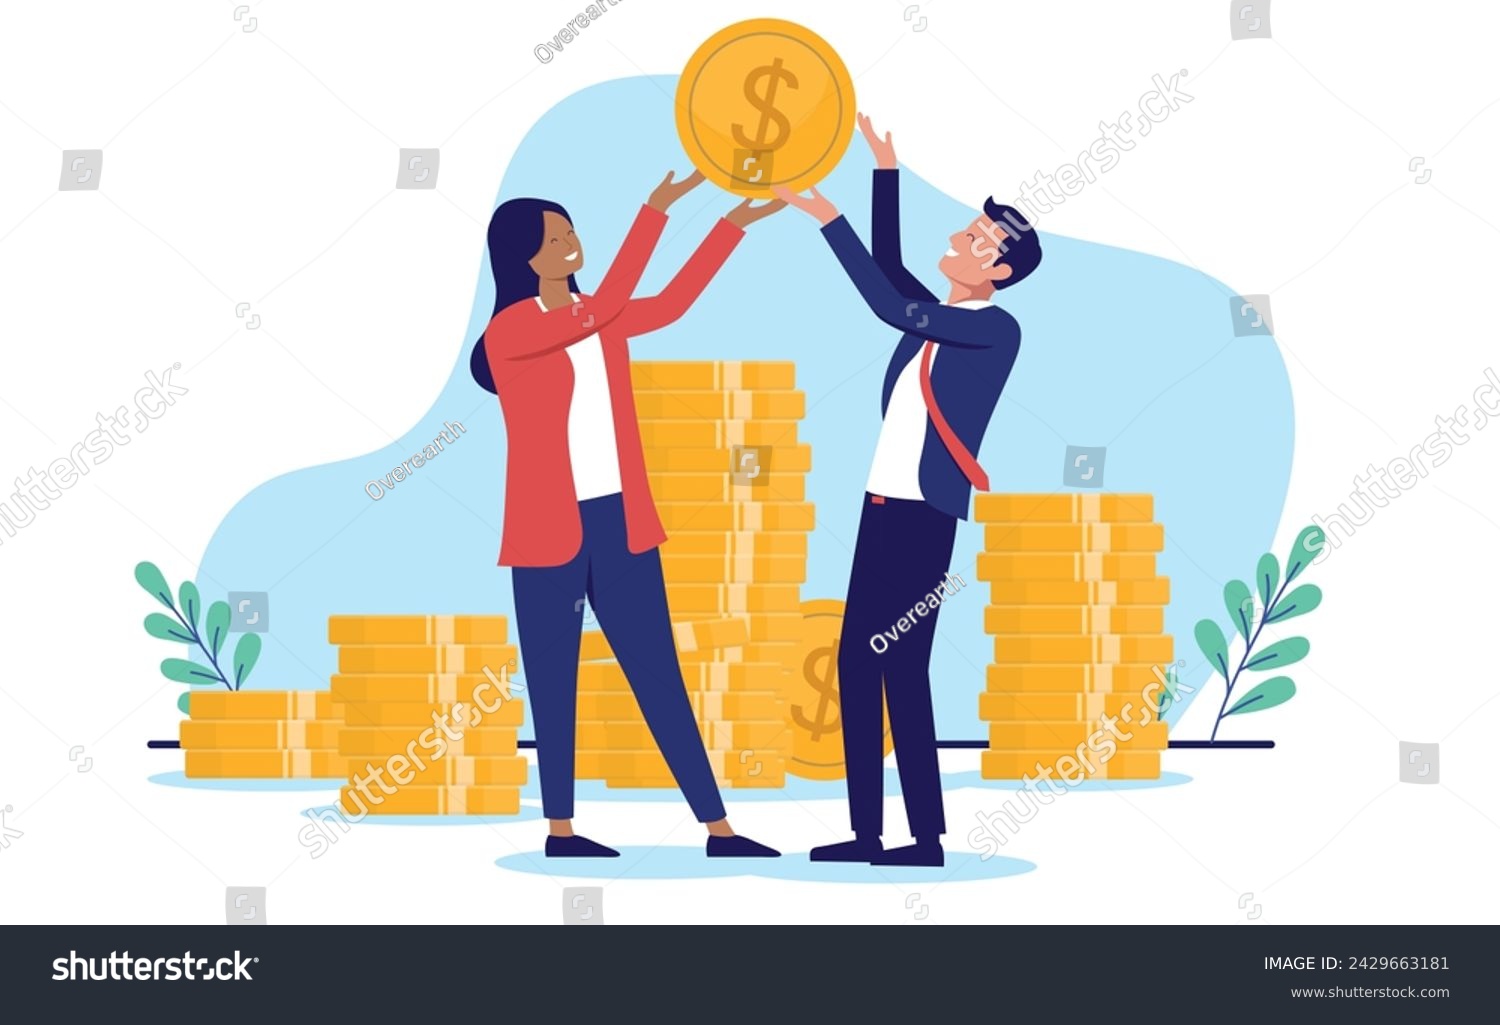 SVG of Businesspeople with money - Two people with business income and profits lifting dollar coin celebrating financial success and profitable company. Economy and finances concept in flat design vector svg